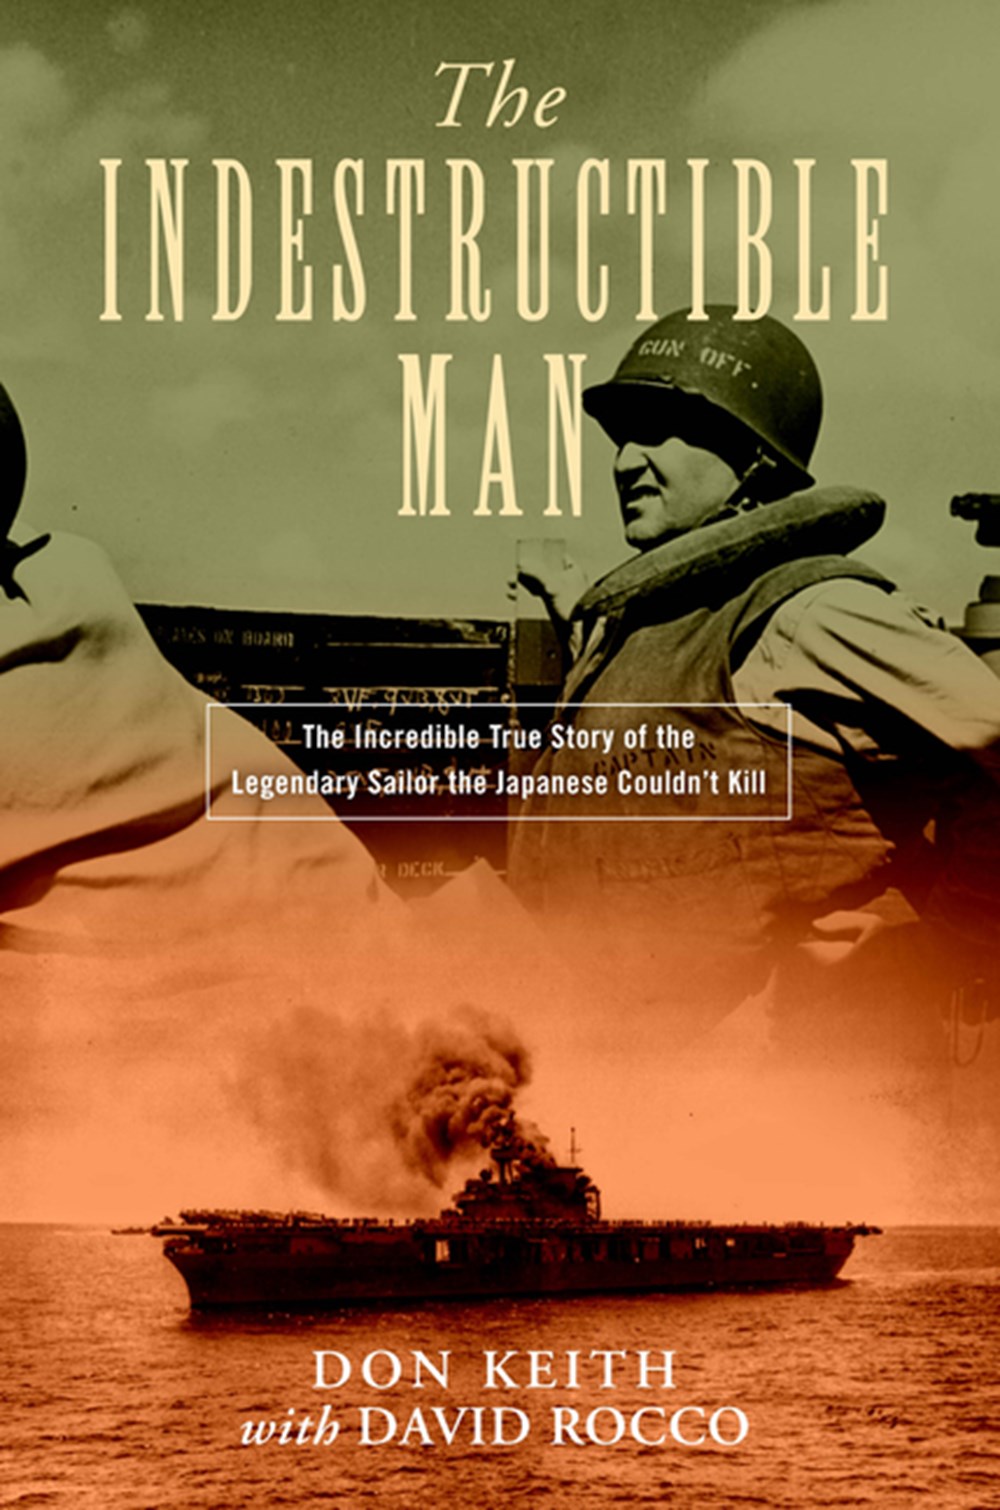 Indestructible Man The Incredible True Story of the Legendary Sailor the Japanese Couldn't Kill